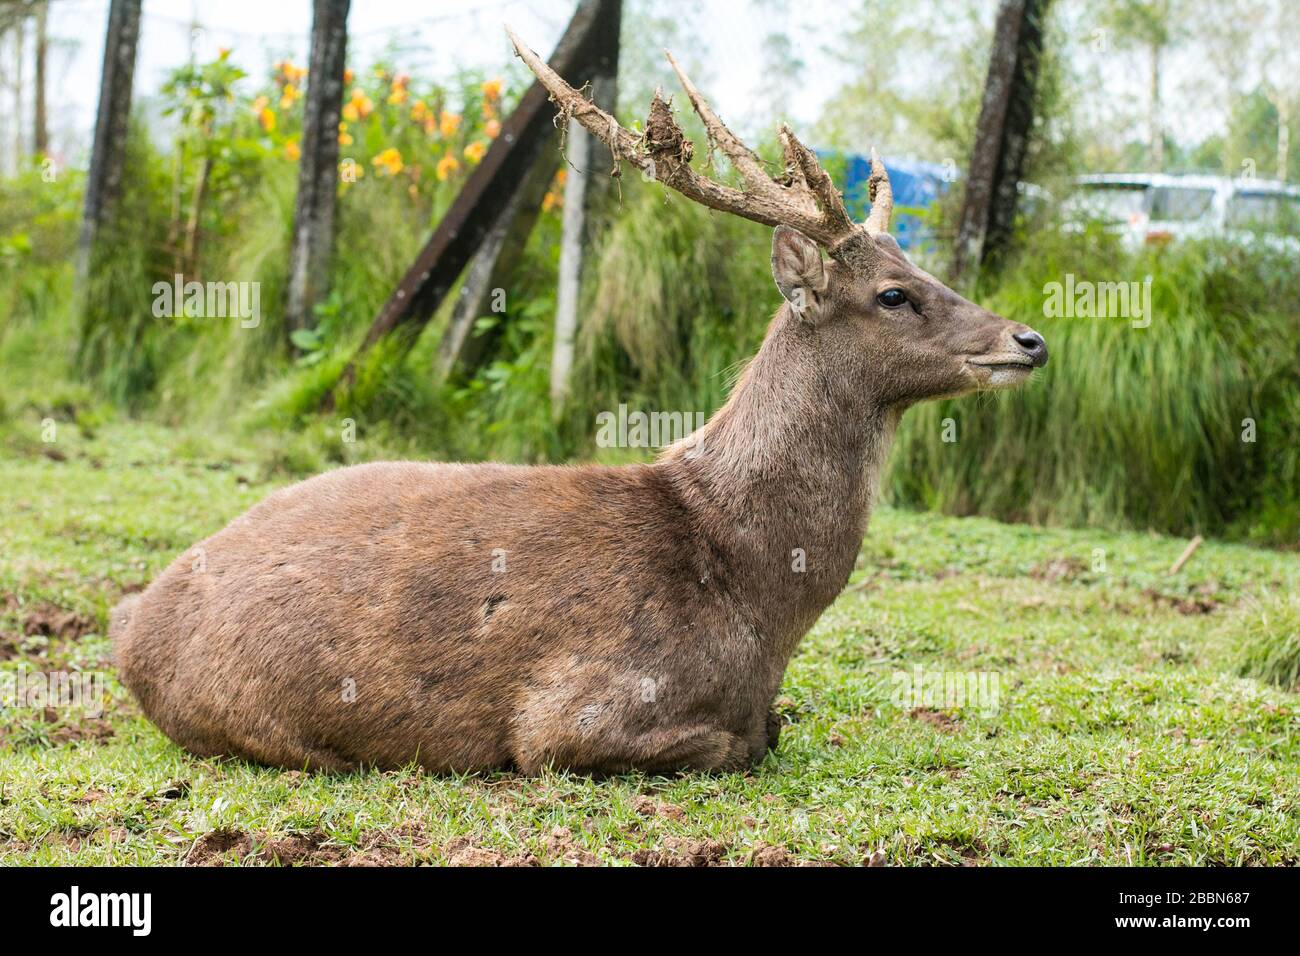 A young male deer sits alone in the mud-grass ground. Stock Photo